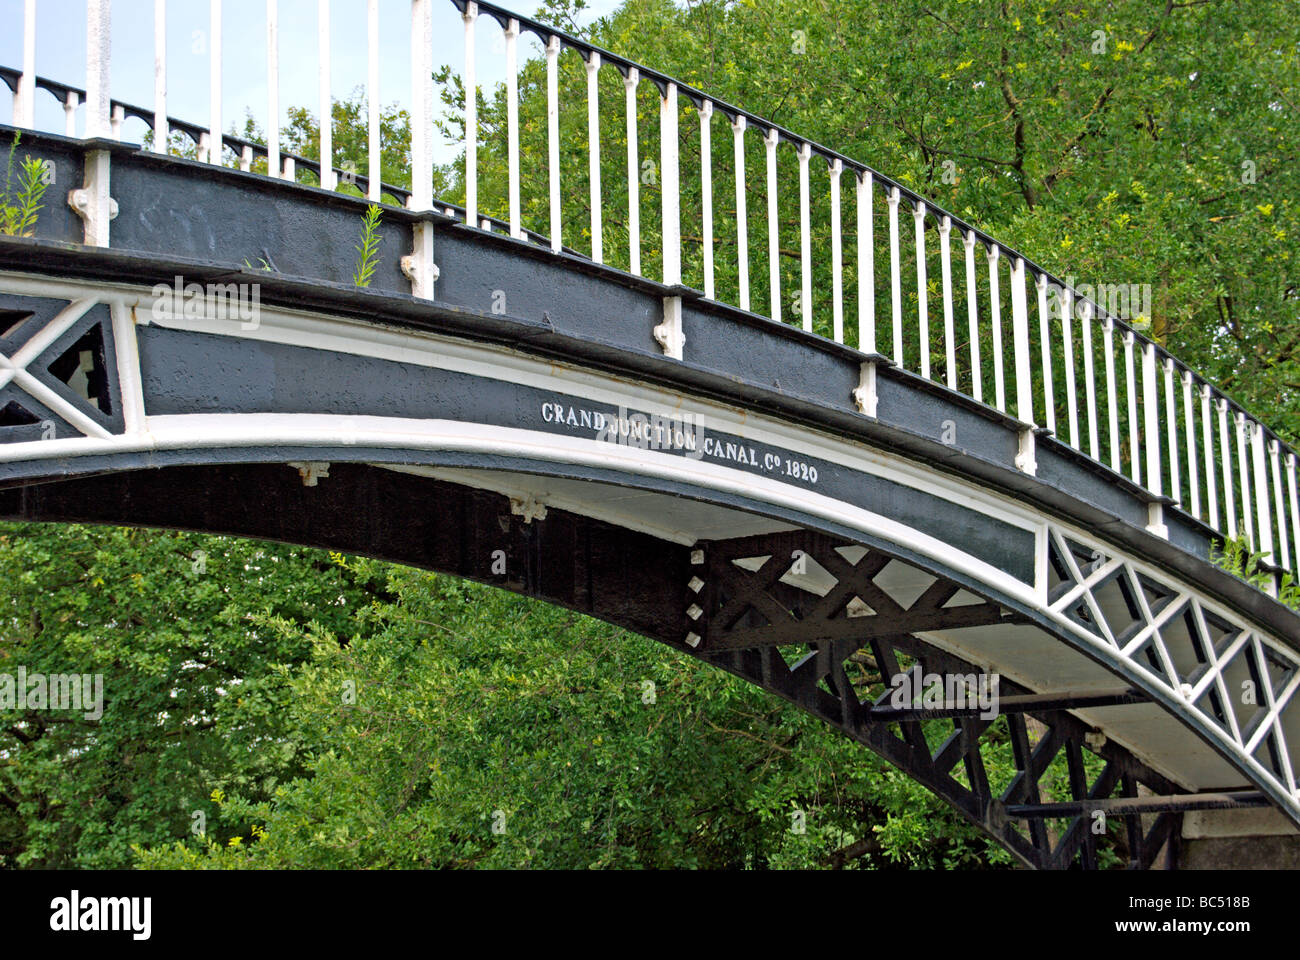 the 1820 gallows bridge crossing the grand union canal,  brentford, london, uk Stock Photo